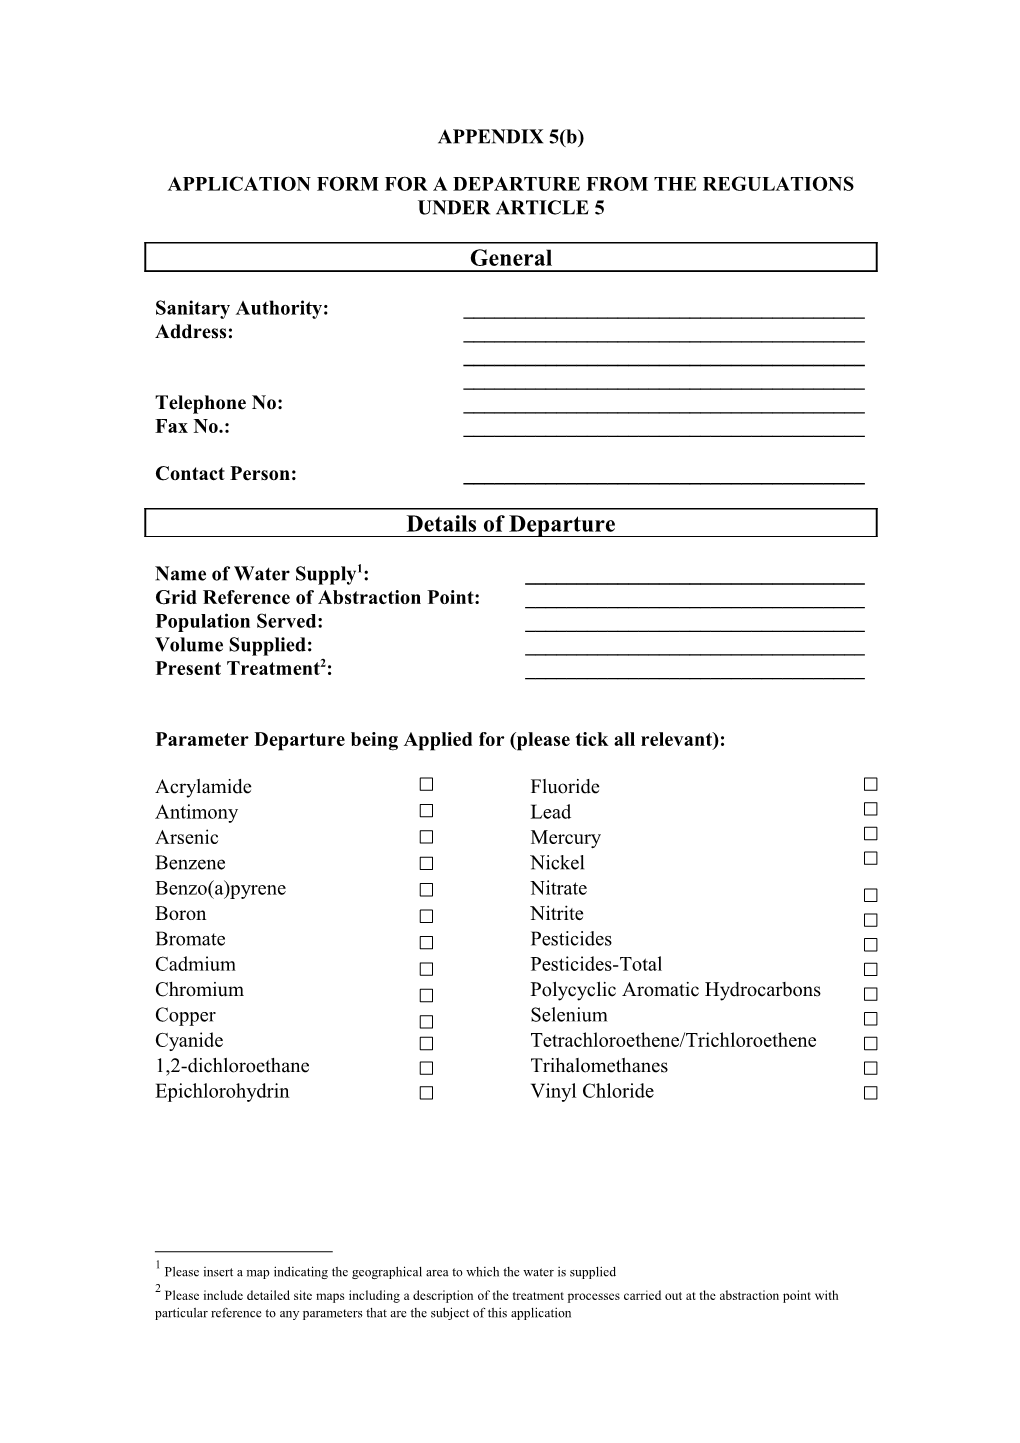 Application Form for a Departure from the Regulations Under Article 5